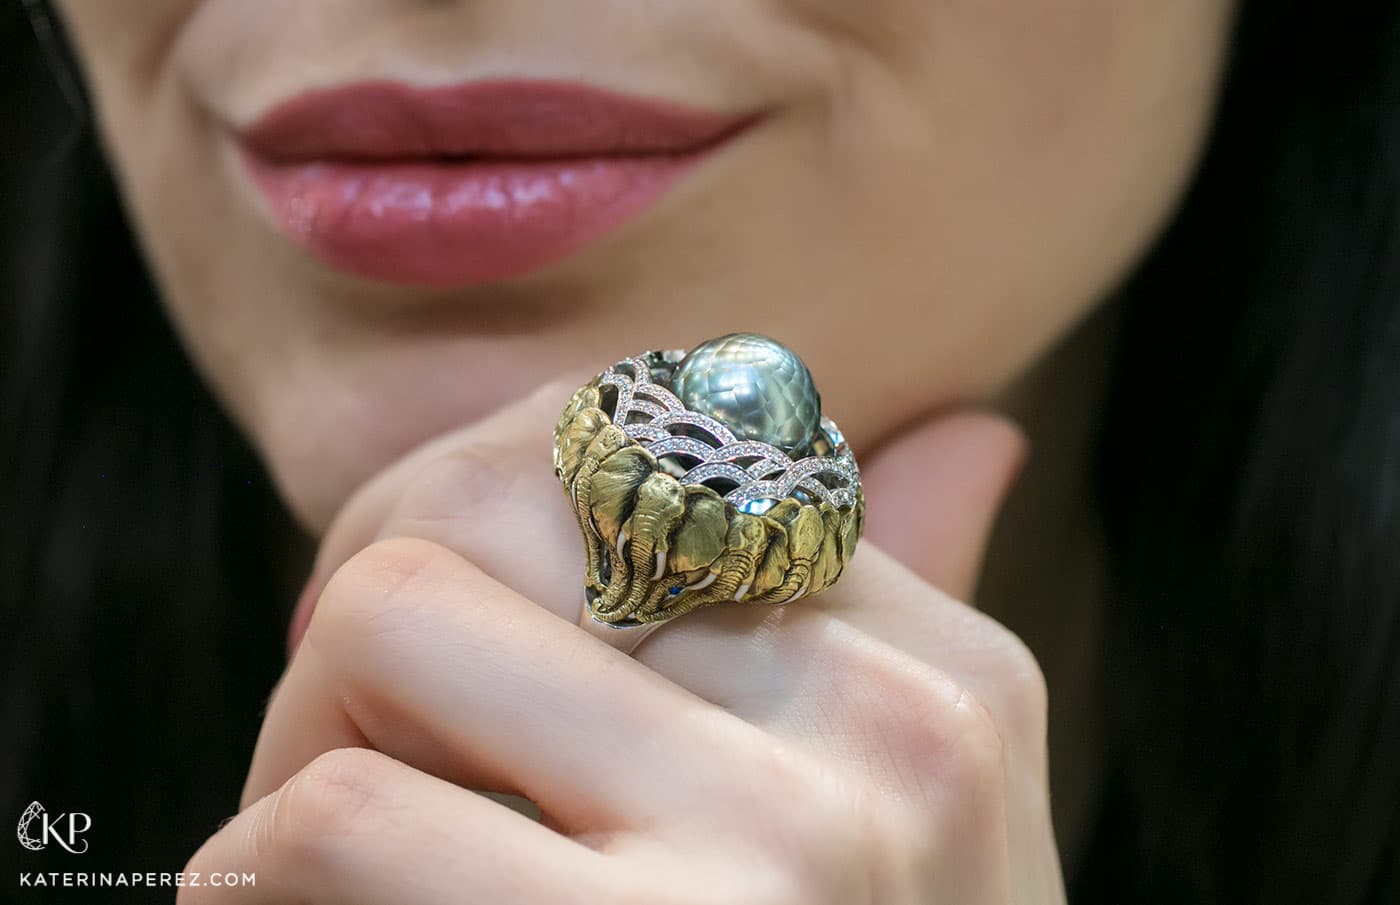 Ilgiz F. "Elephants" ring in sculptured yellow gold with diamonds and faceted pearl